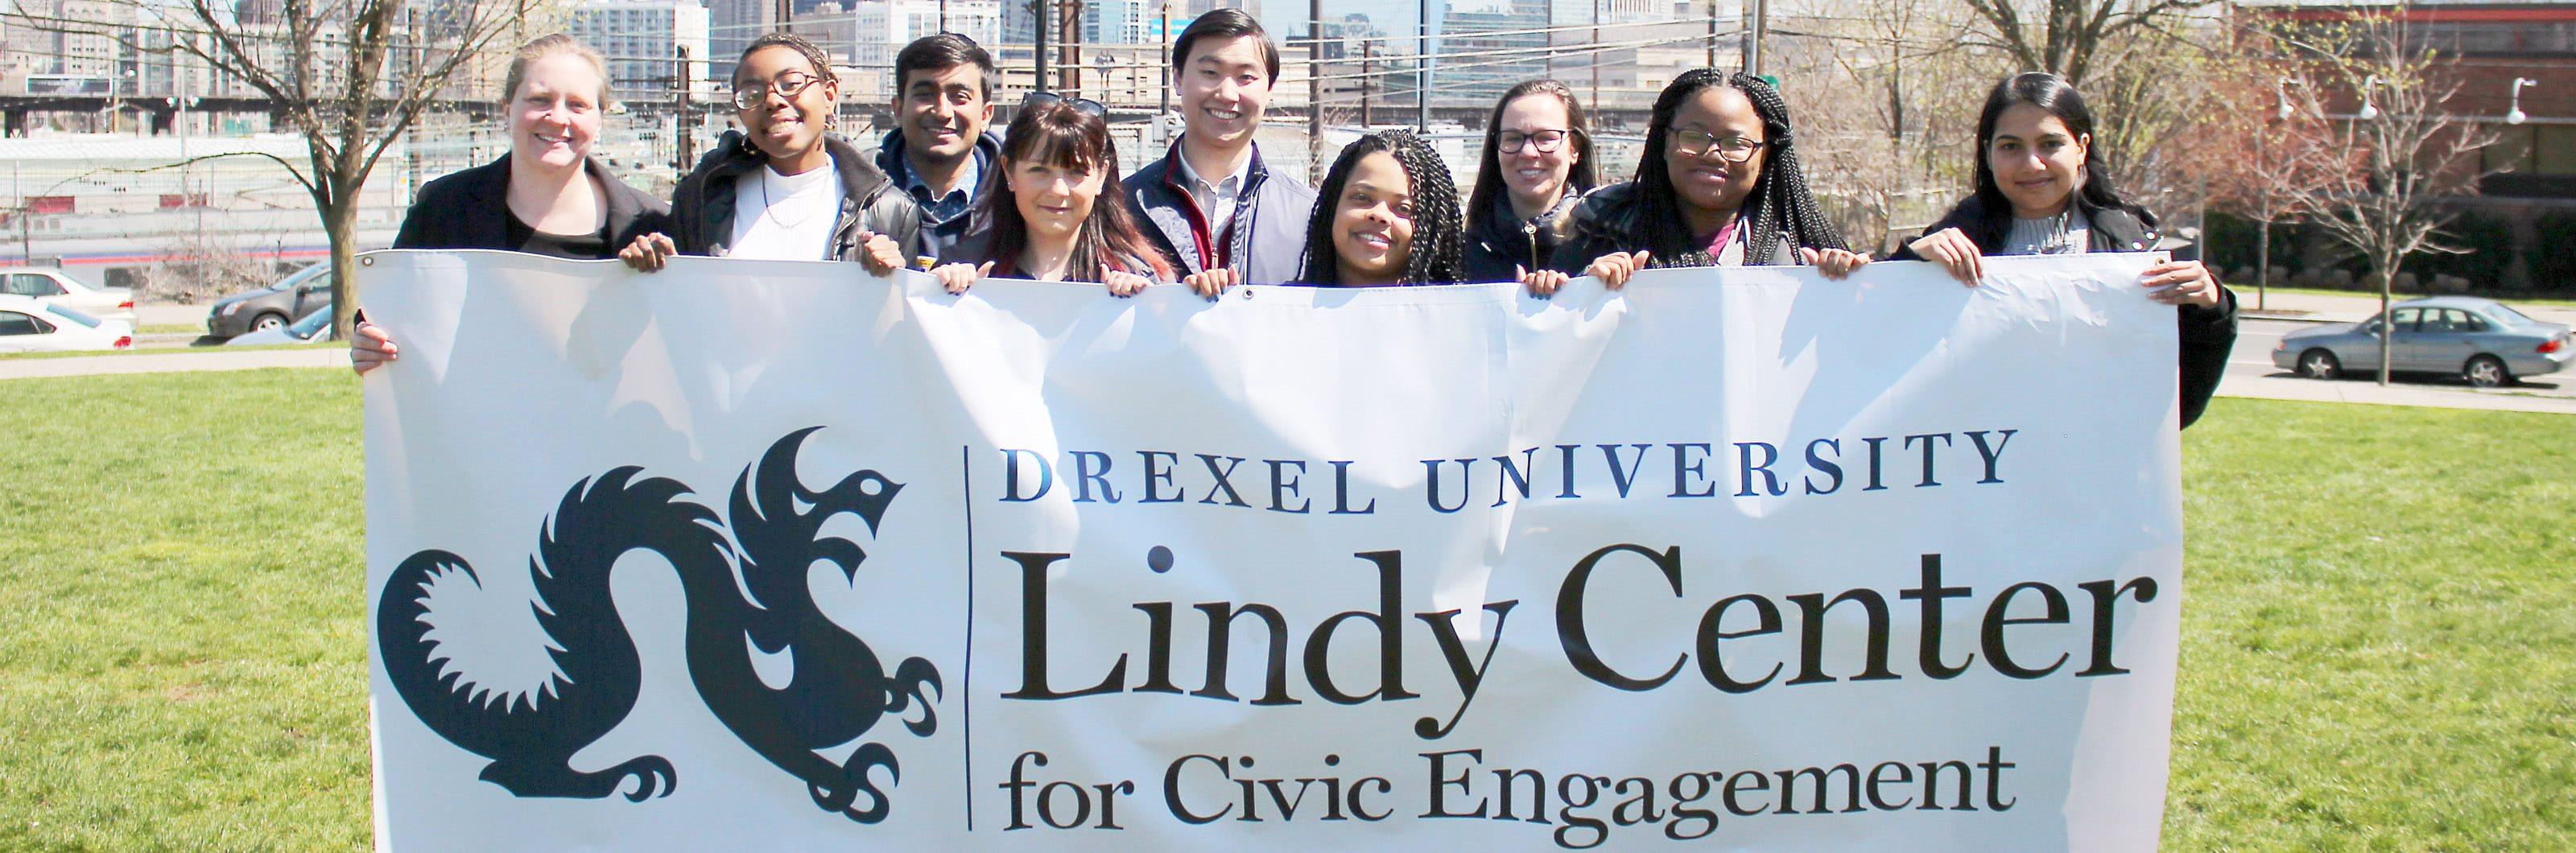 Students holding a sign that says Drexel University Lindy Center for Civic Engagement